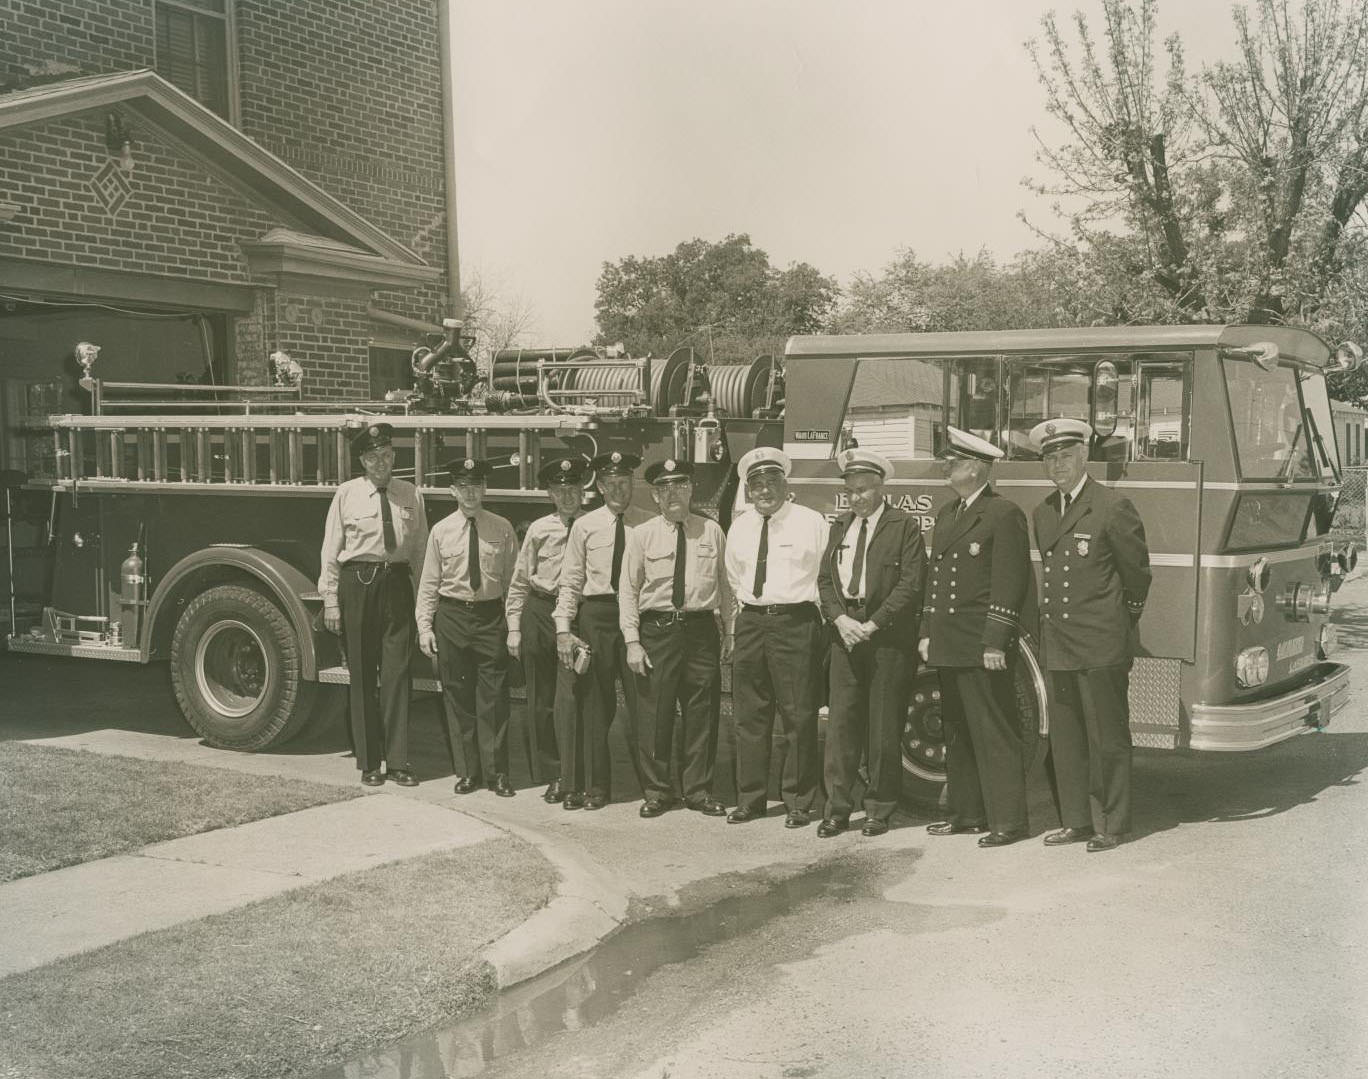 Dallas Firefighters and Truck, 1964